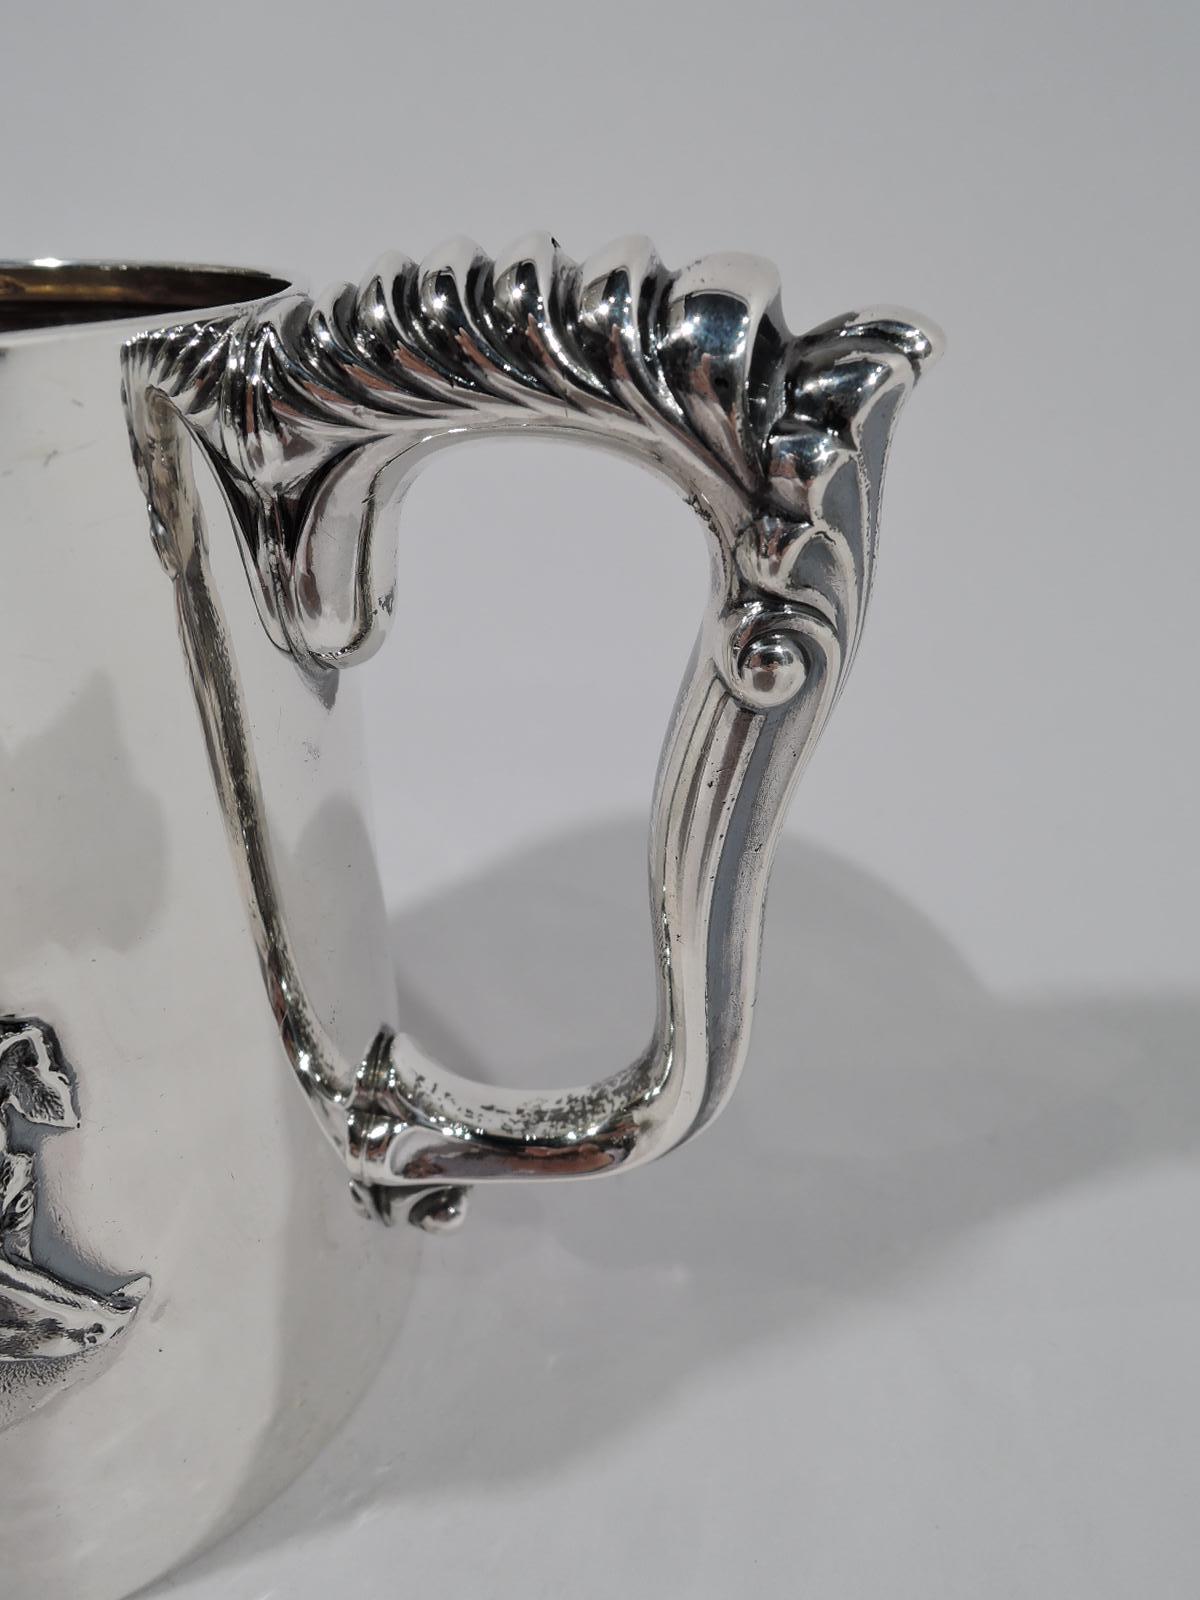 Victorian sterling silver baby cup. Made by Gorham in Providence in 1887. Straight sides and fancy fluid bracket handle with graduated gadrooning and scallop-shell thumb rest. Chased ornament: Four expressive dog heads. A canine medley, each doggy